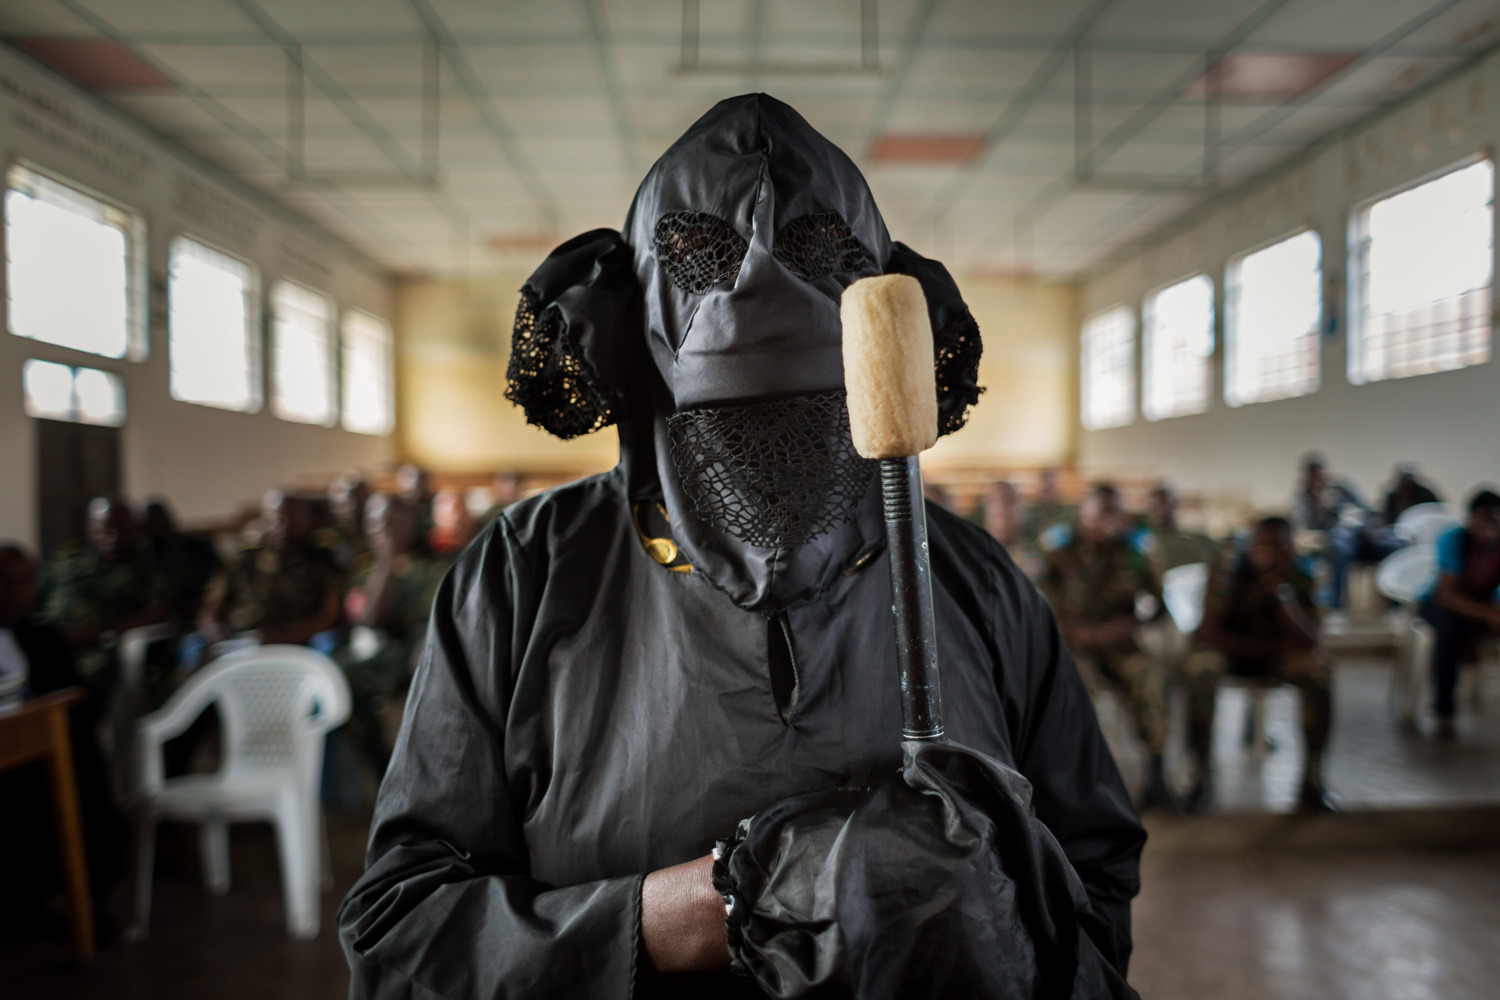  A victim testifies. On a November evening in 2012, around 8 p.m., Congolese government soldiers knocked on her door. Her five children scattered and hid in the bedroom. Her husband was already gone. He fled when he heard bullets fired earlier. When 